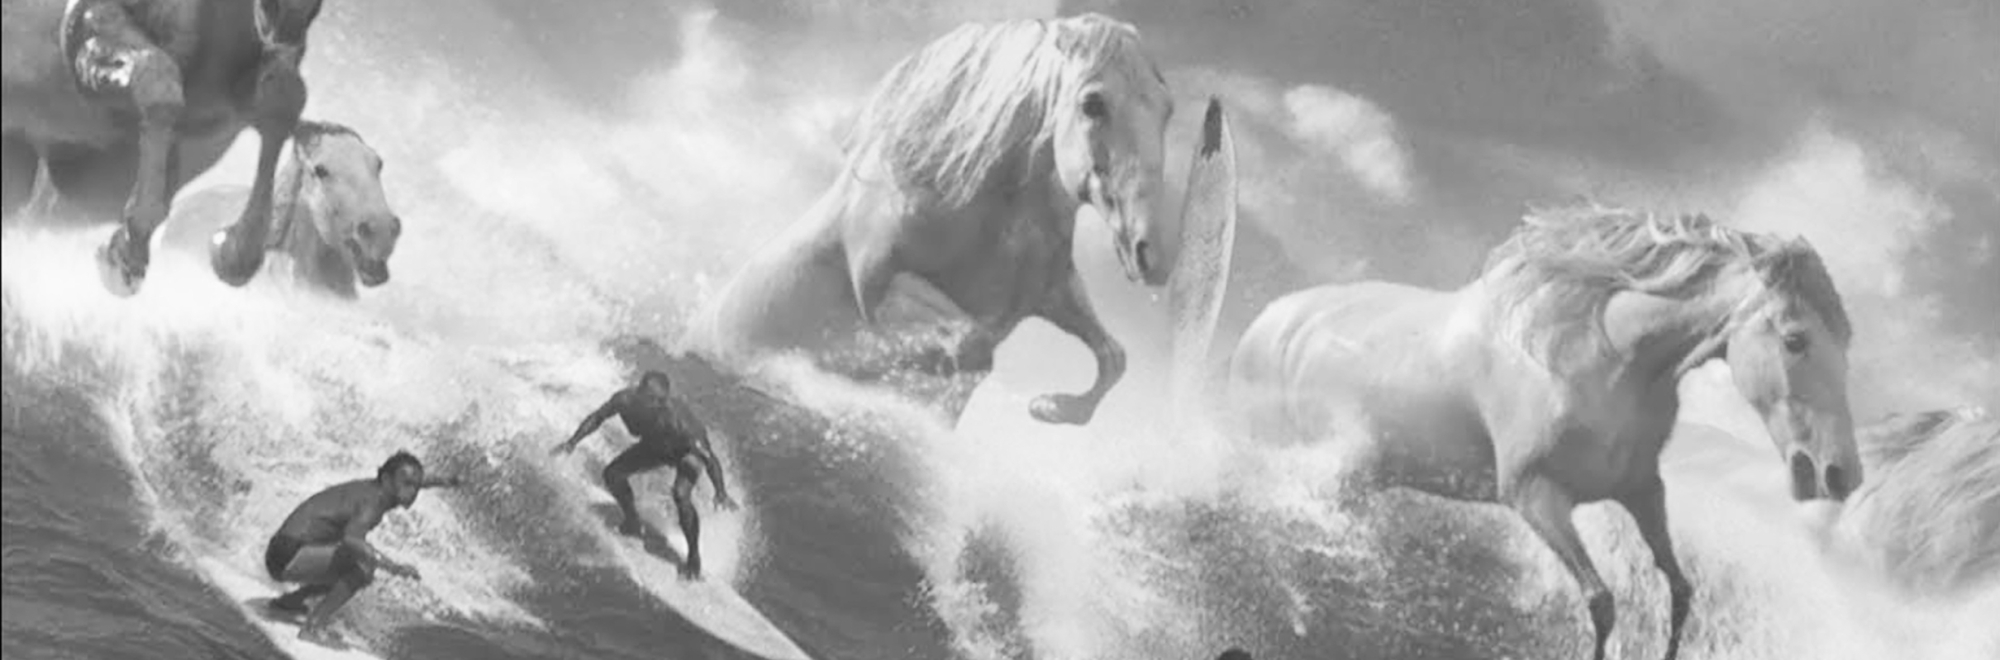 Meet The Maker: The inside story on how Guinness' surfer ad came to be